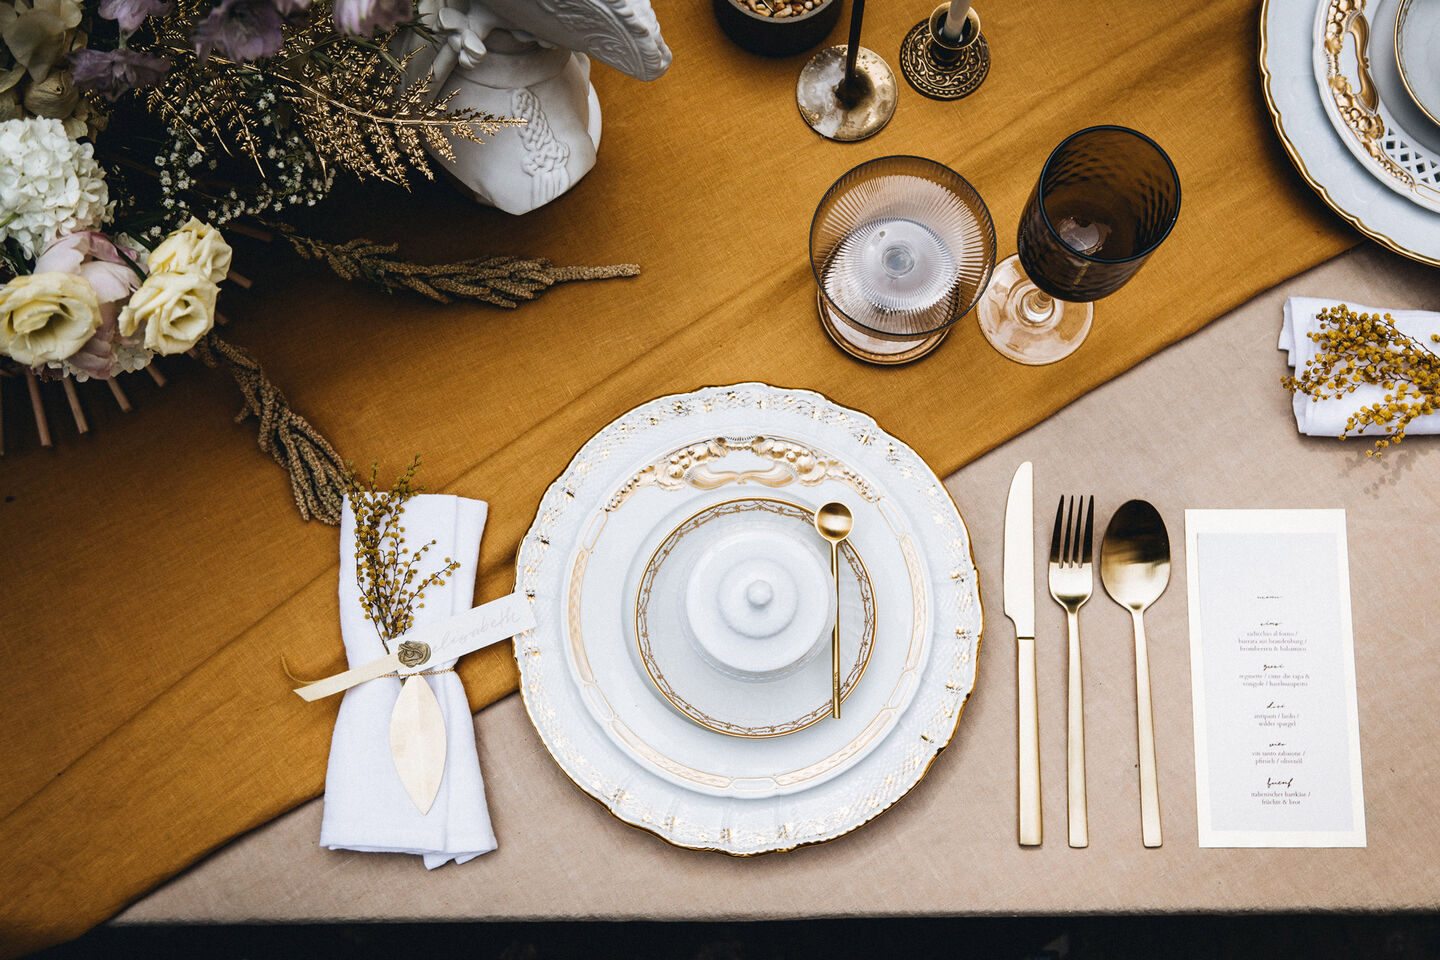 View from above on set table with plates, silverware and glasses